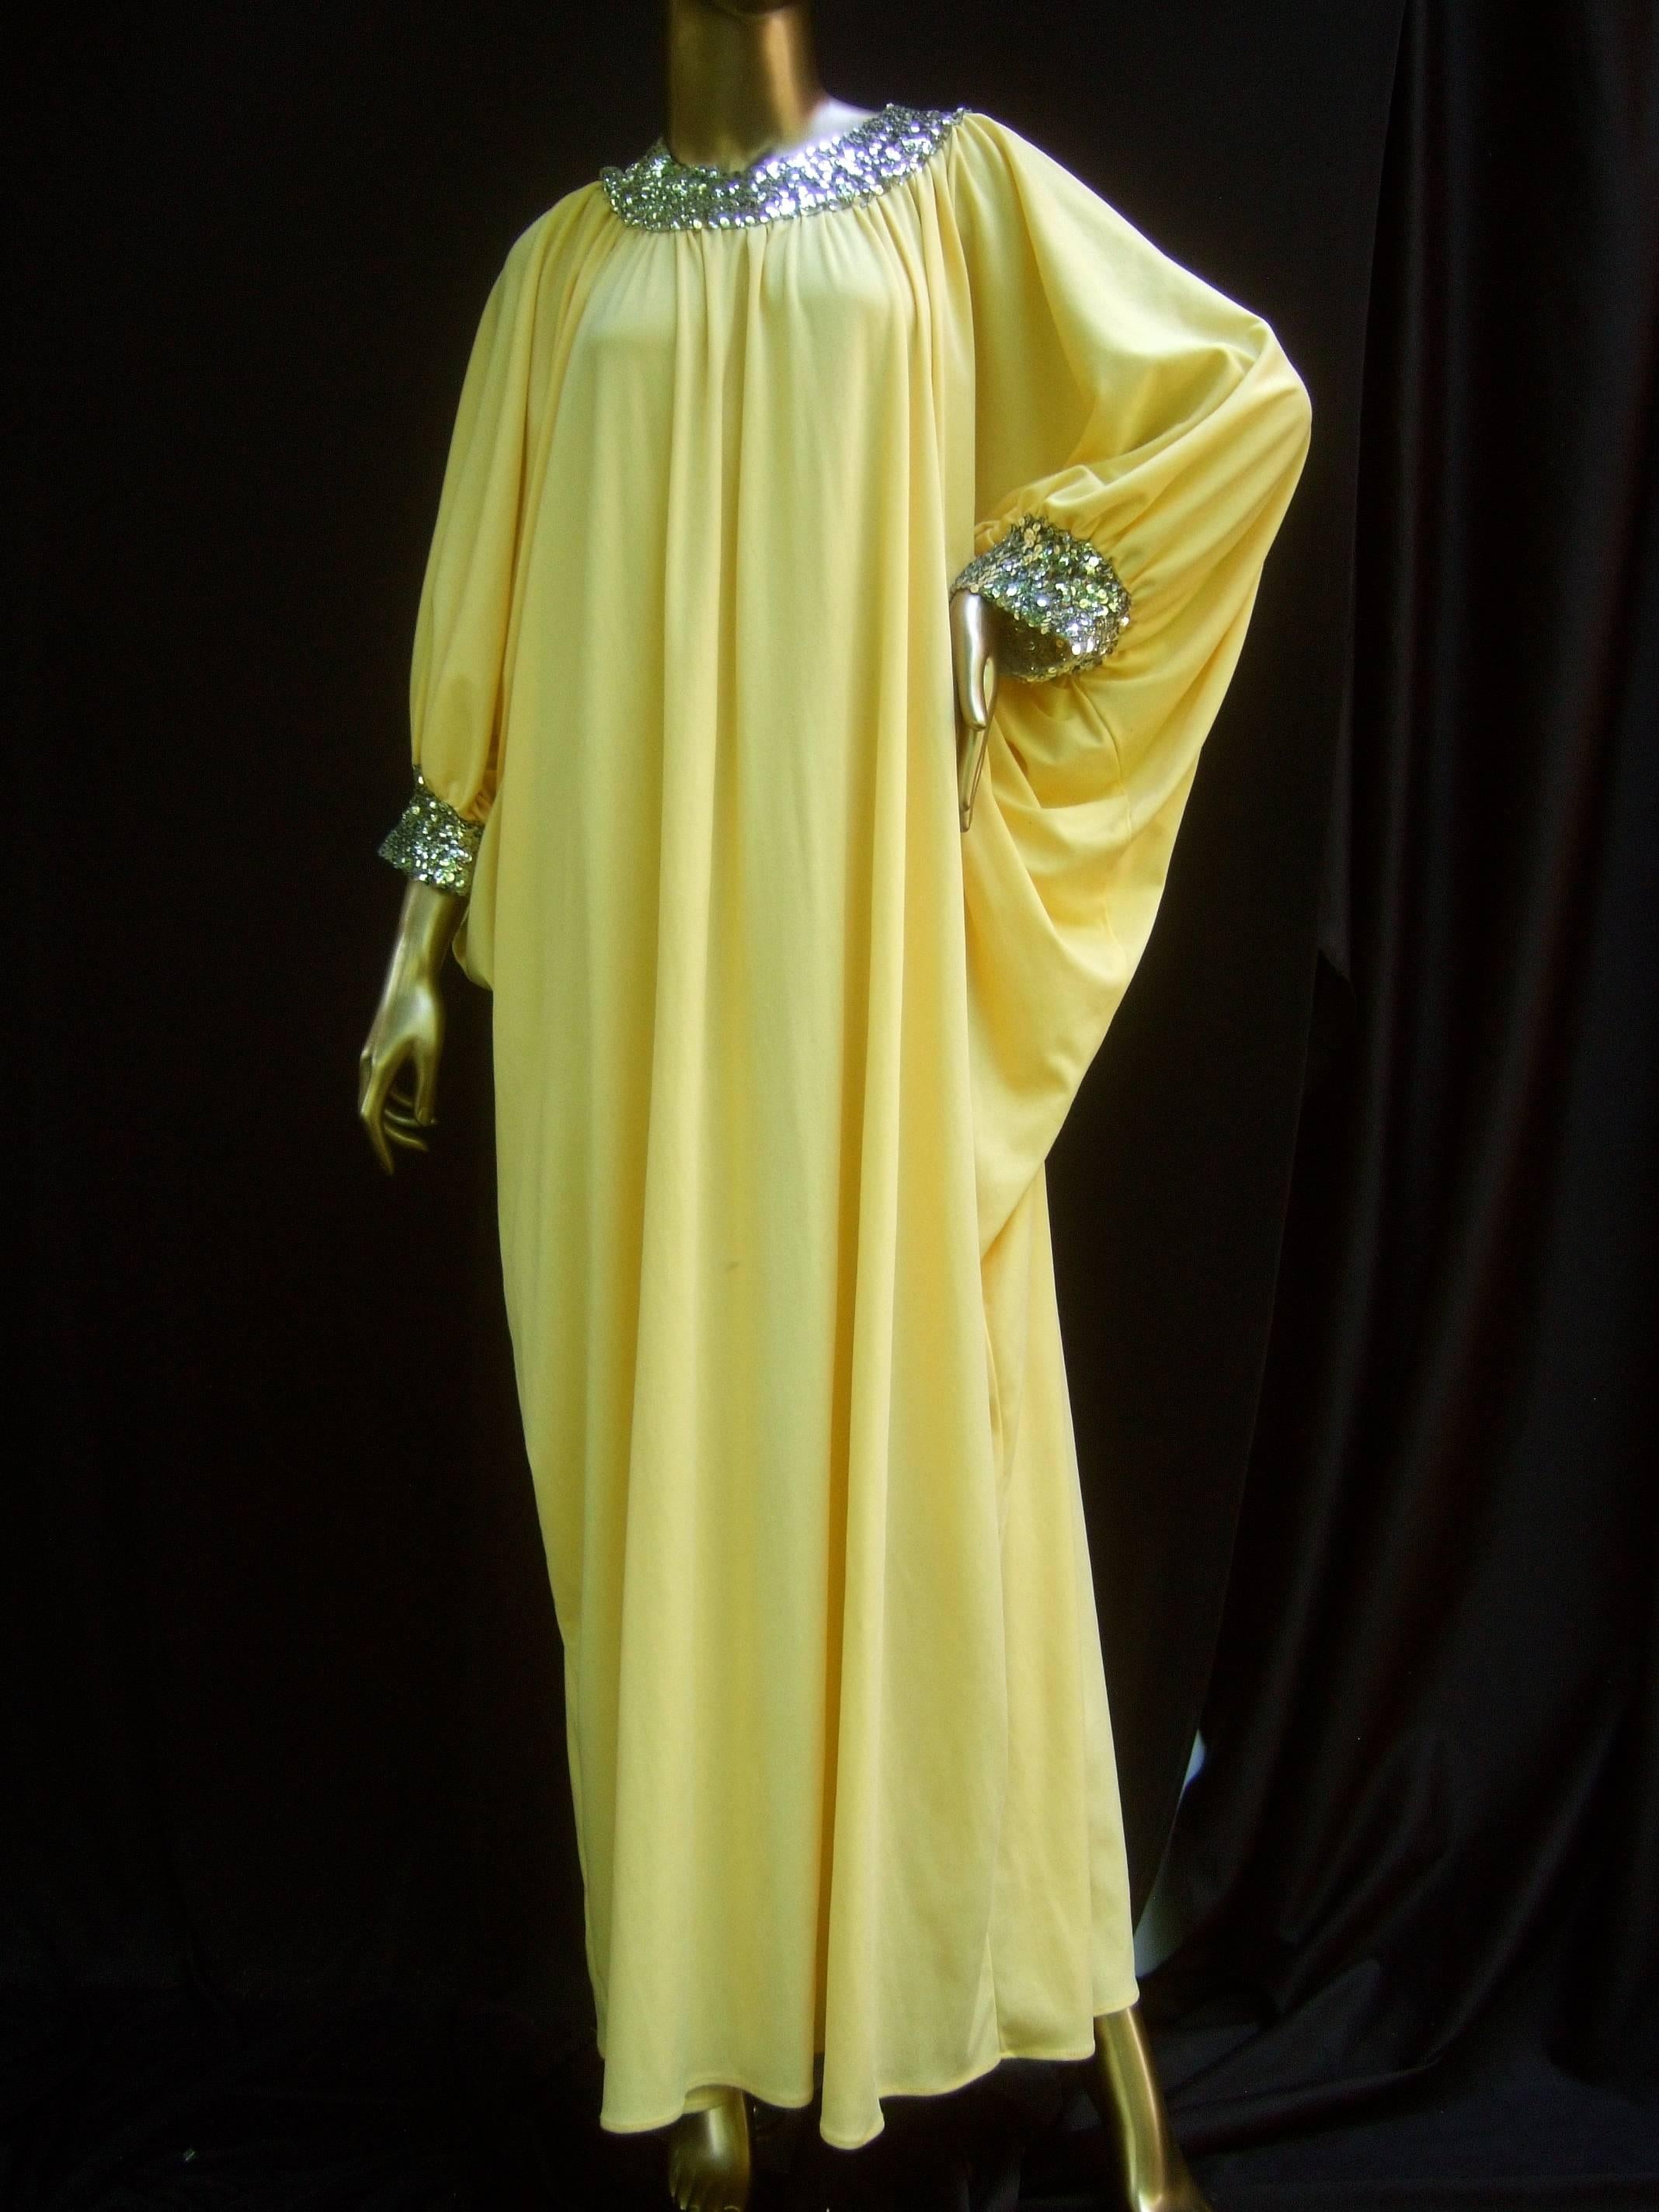 1970s Saks Fifth Avenue lemon yellow poly knit caftan gown 
The stylish polyester caftan lounge gown is designed with a 
voluminous draped silhouette and batwing style sleeves 

The collar and cuffs are framed with silver metallic sequins 
Designed